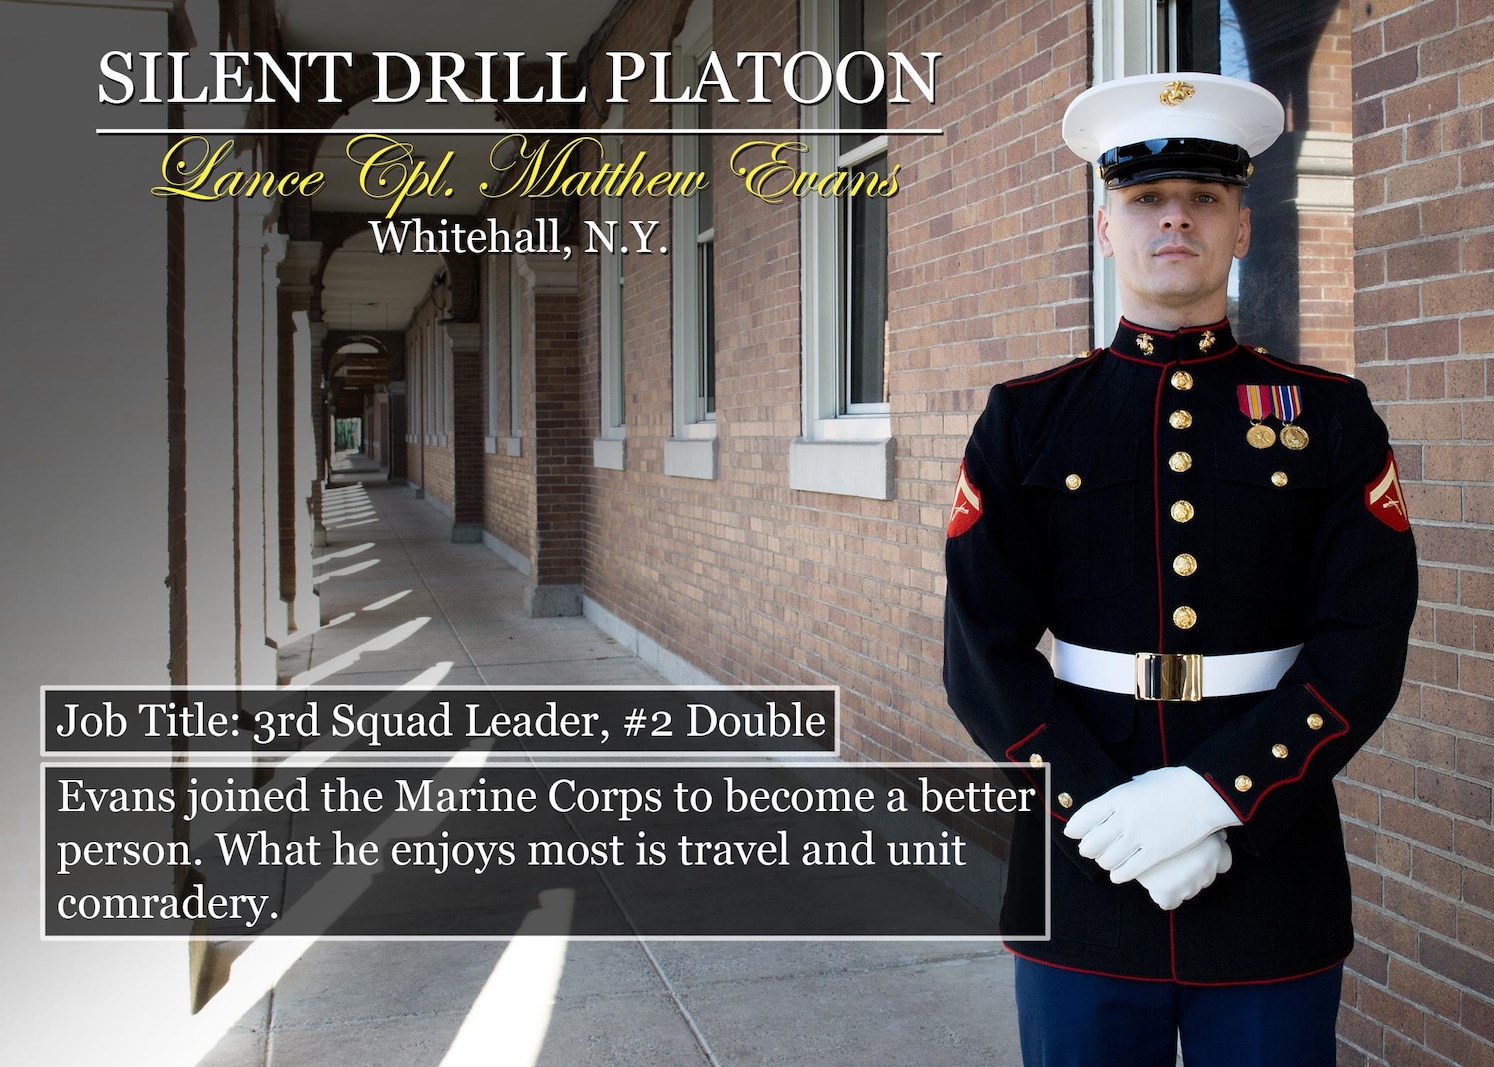 Lance Cpl. Matthew Evans
Whitehall, N.Y.
Job Title: 3rd Squad Leader, #2 Double
Evans joined the Marine Corps to become a better person. What he enjoys most is travel and unit comradery.
(Official Marine Corps graphic by Cpl. Chi Nguyen/Released)